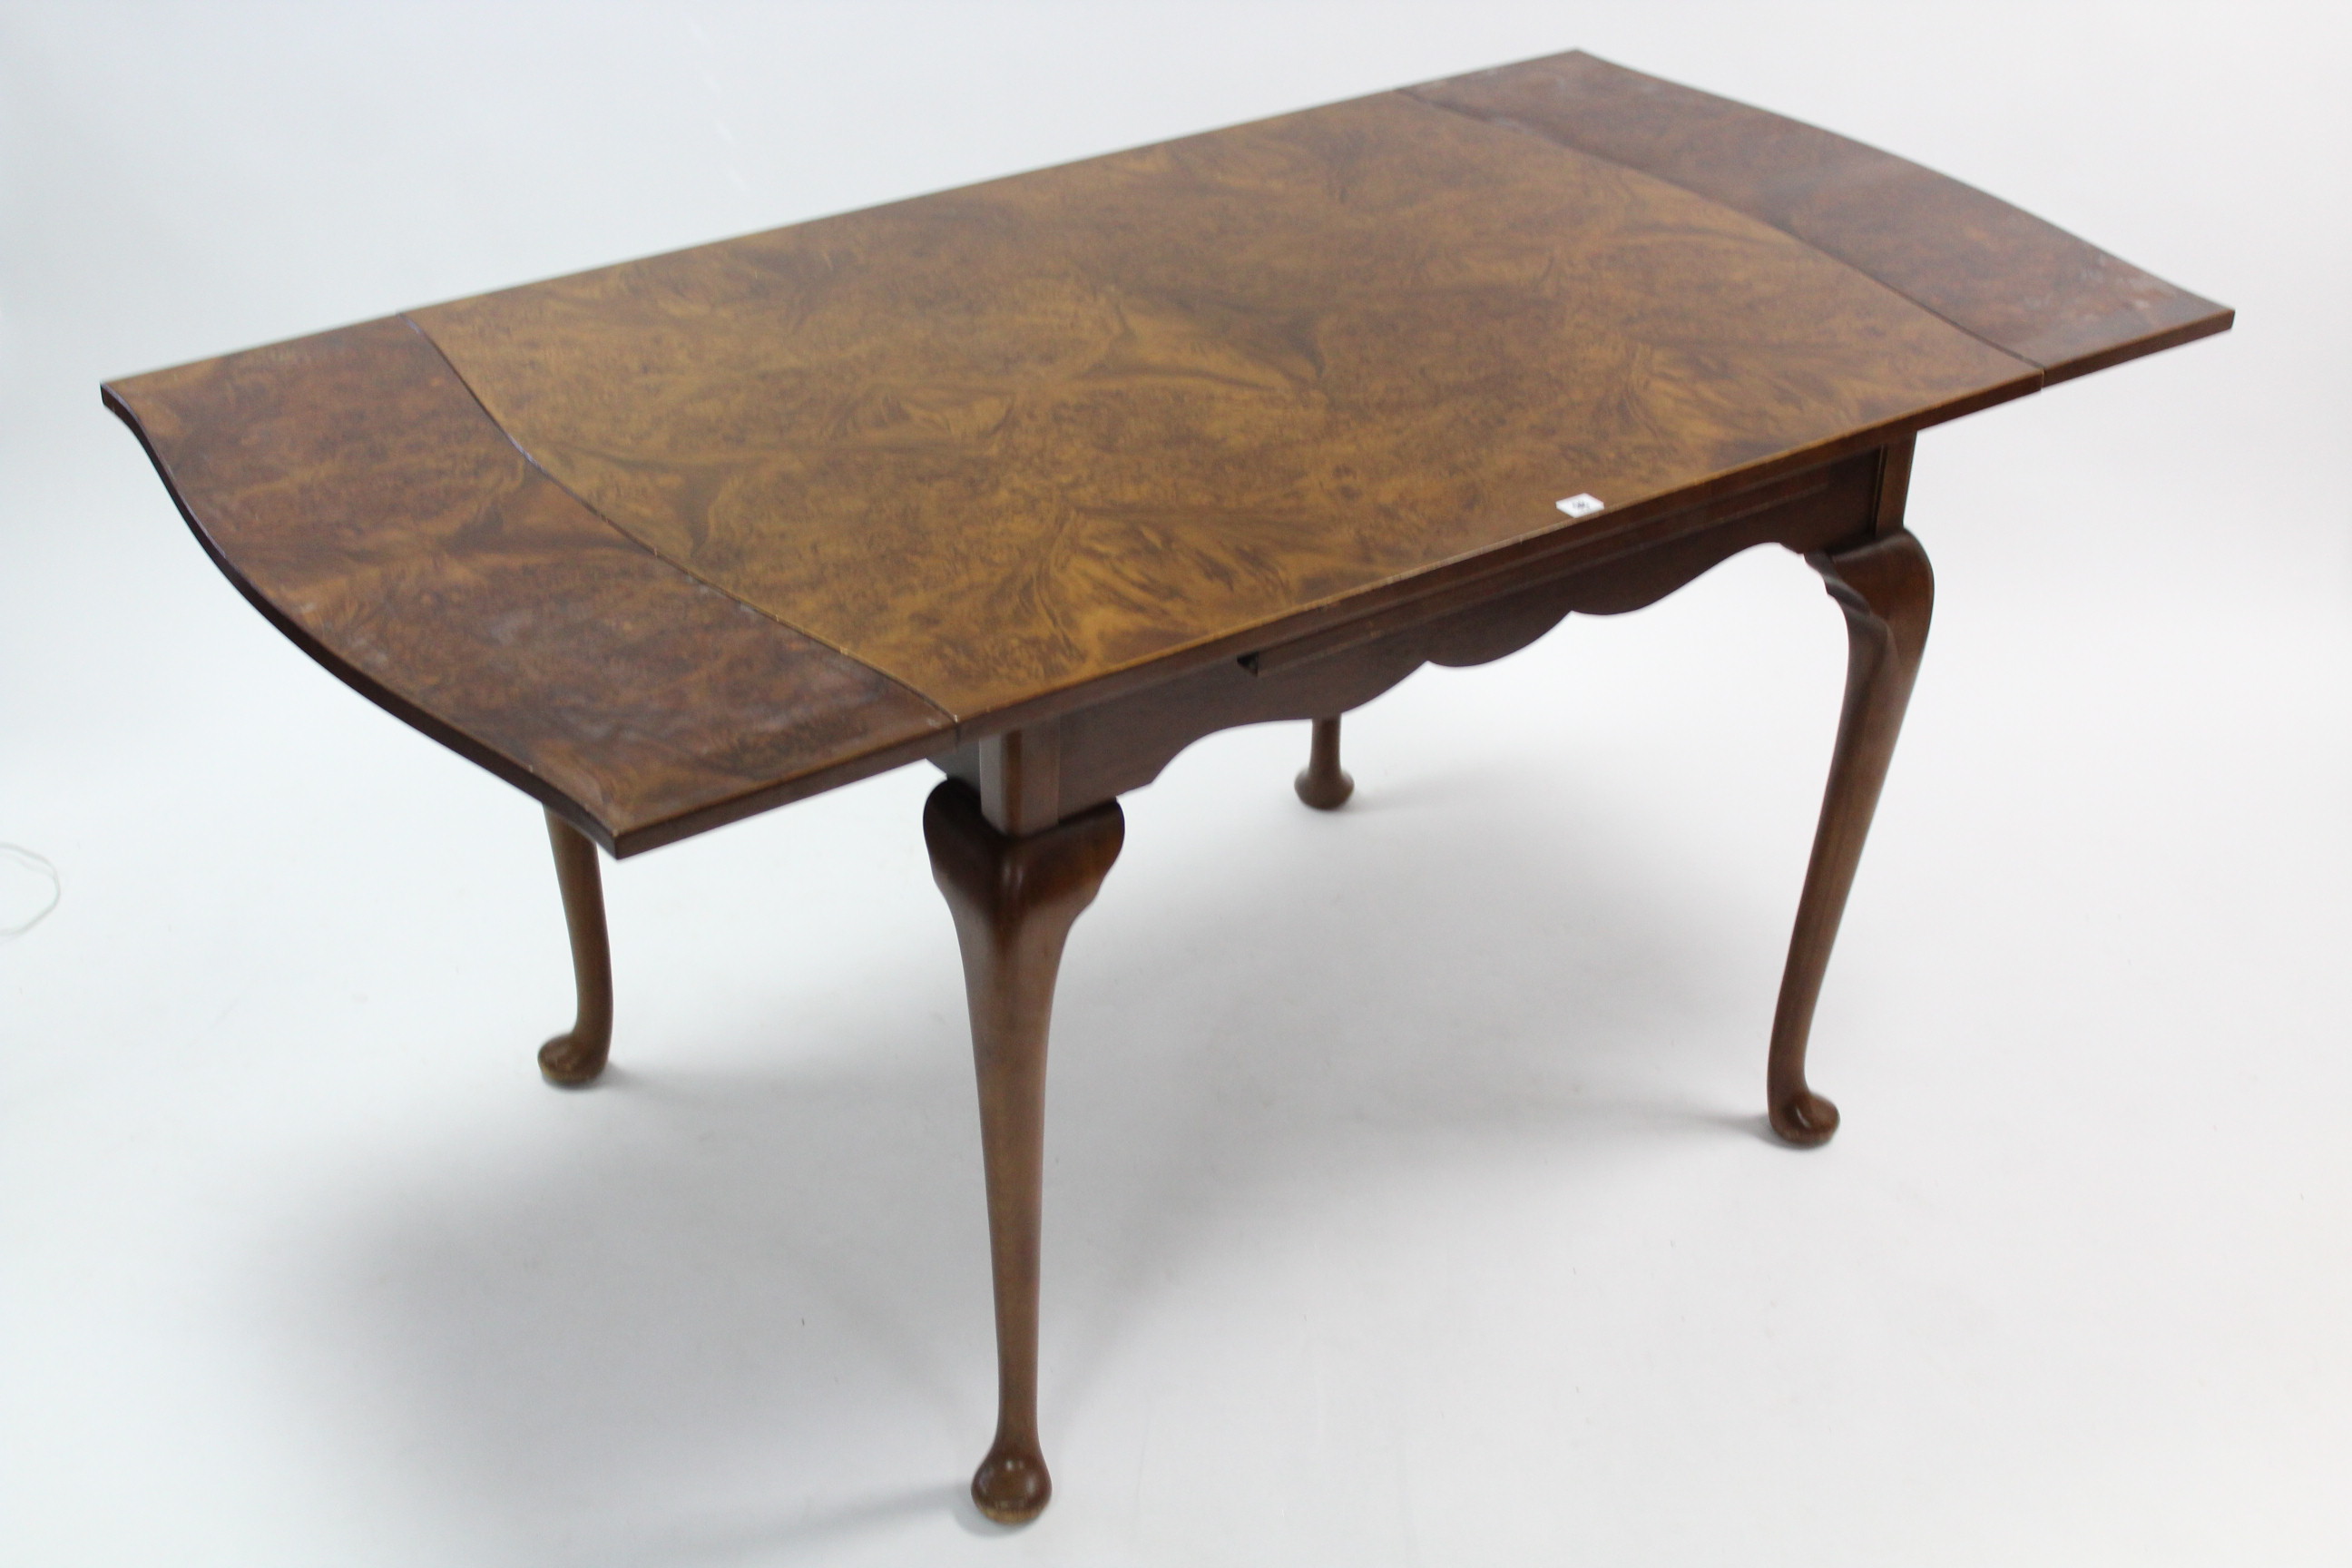 A burr-wood draw-leaf dining table on slender cabriole legs & pad feet, 33” x 67” (open), & a - Image 3 of 4